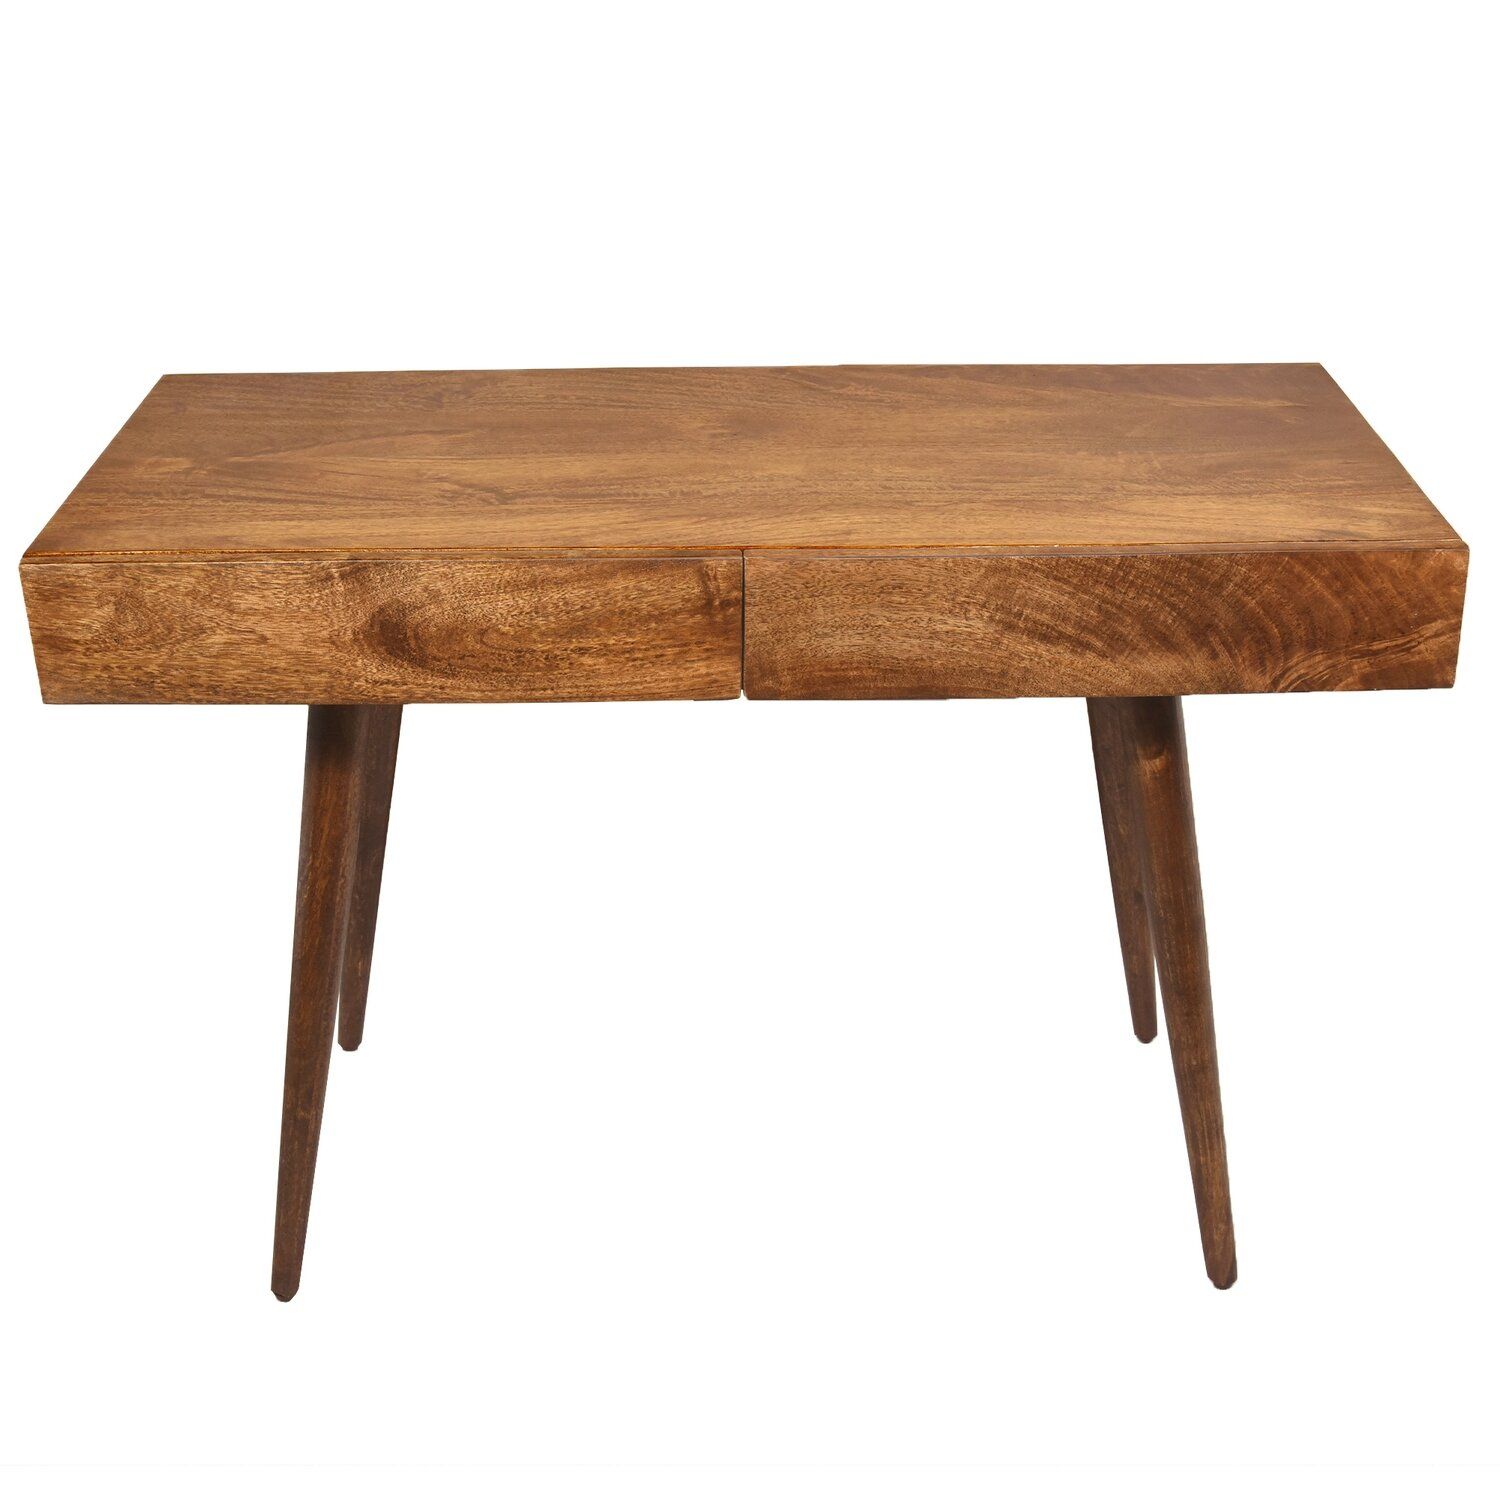 Mango Wood Writing Desk With Tapered Legs In Mango Wood Writing Desks (View 2 of 15)